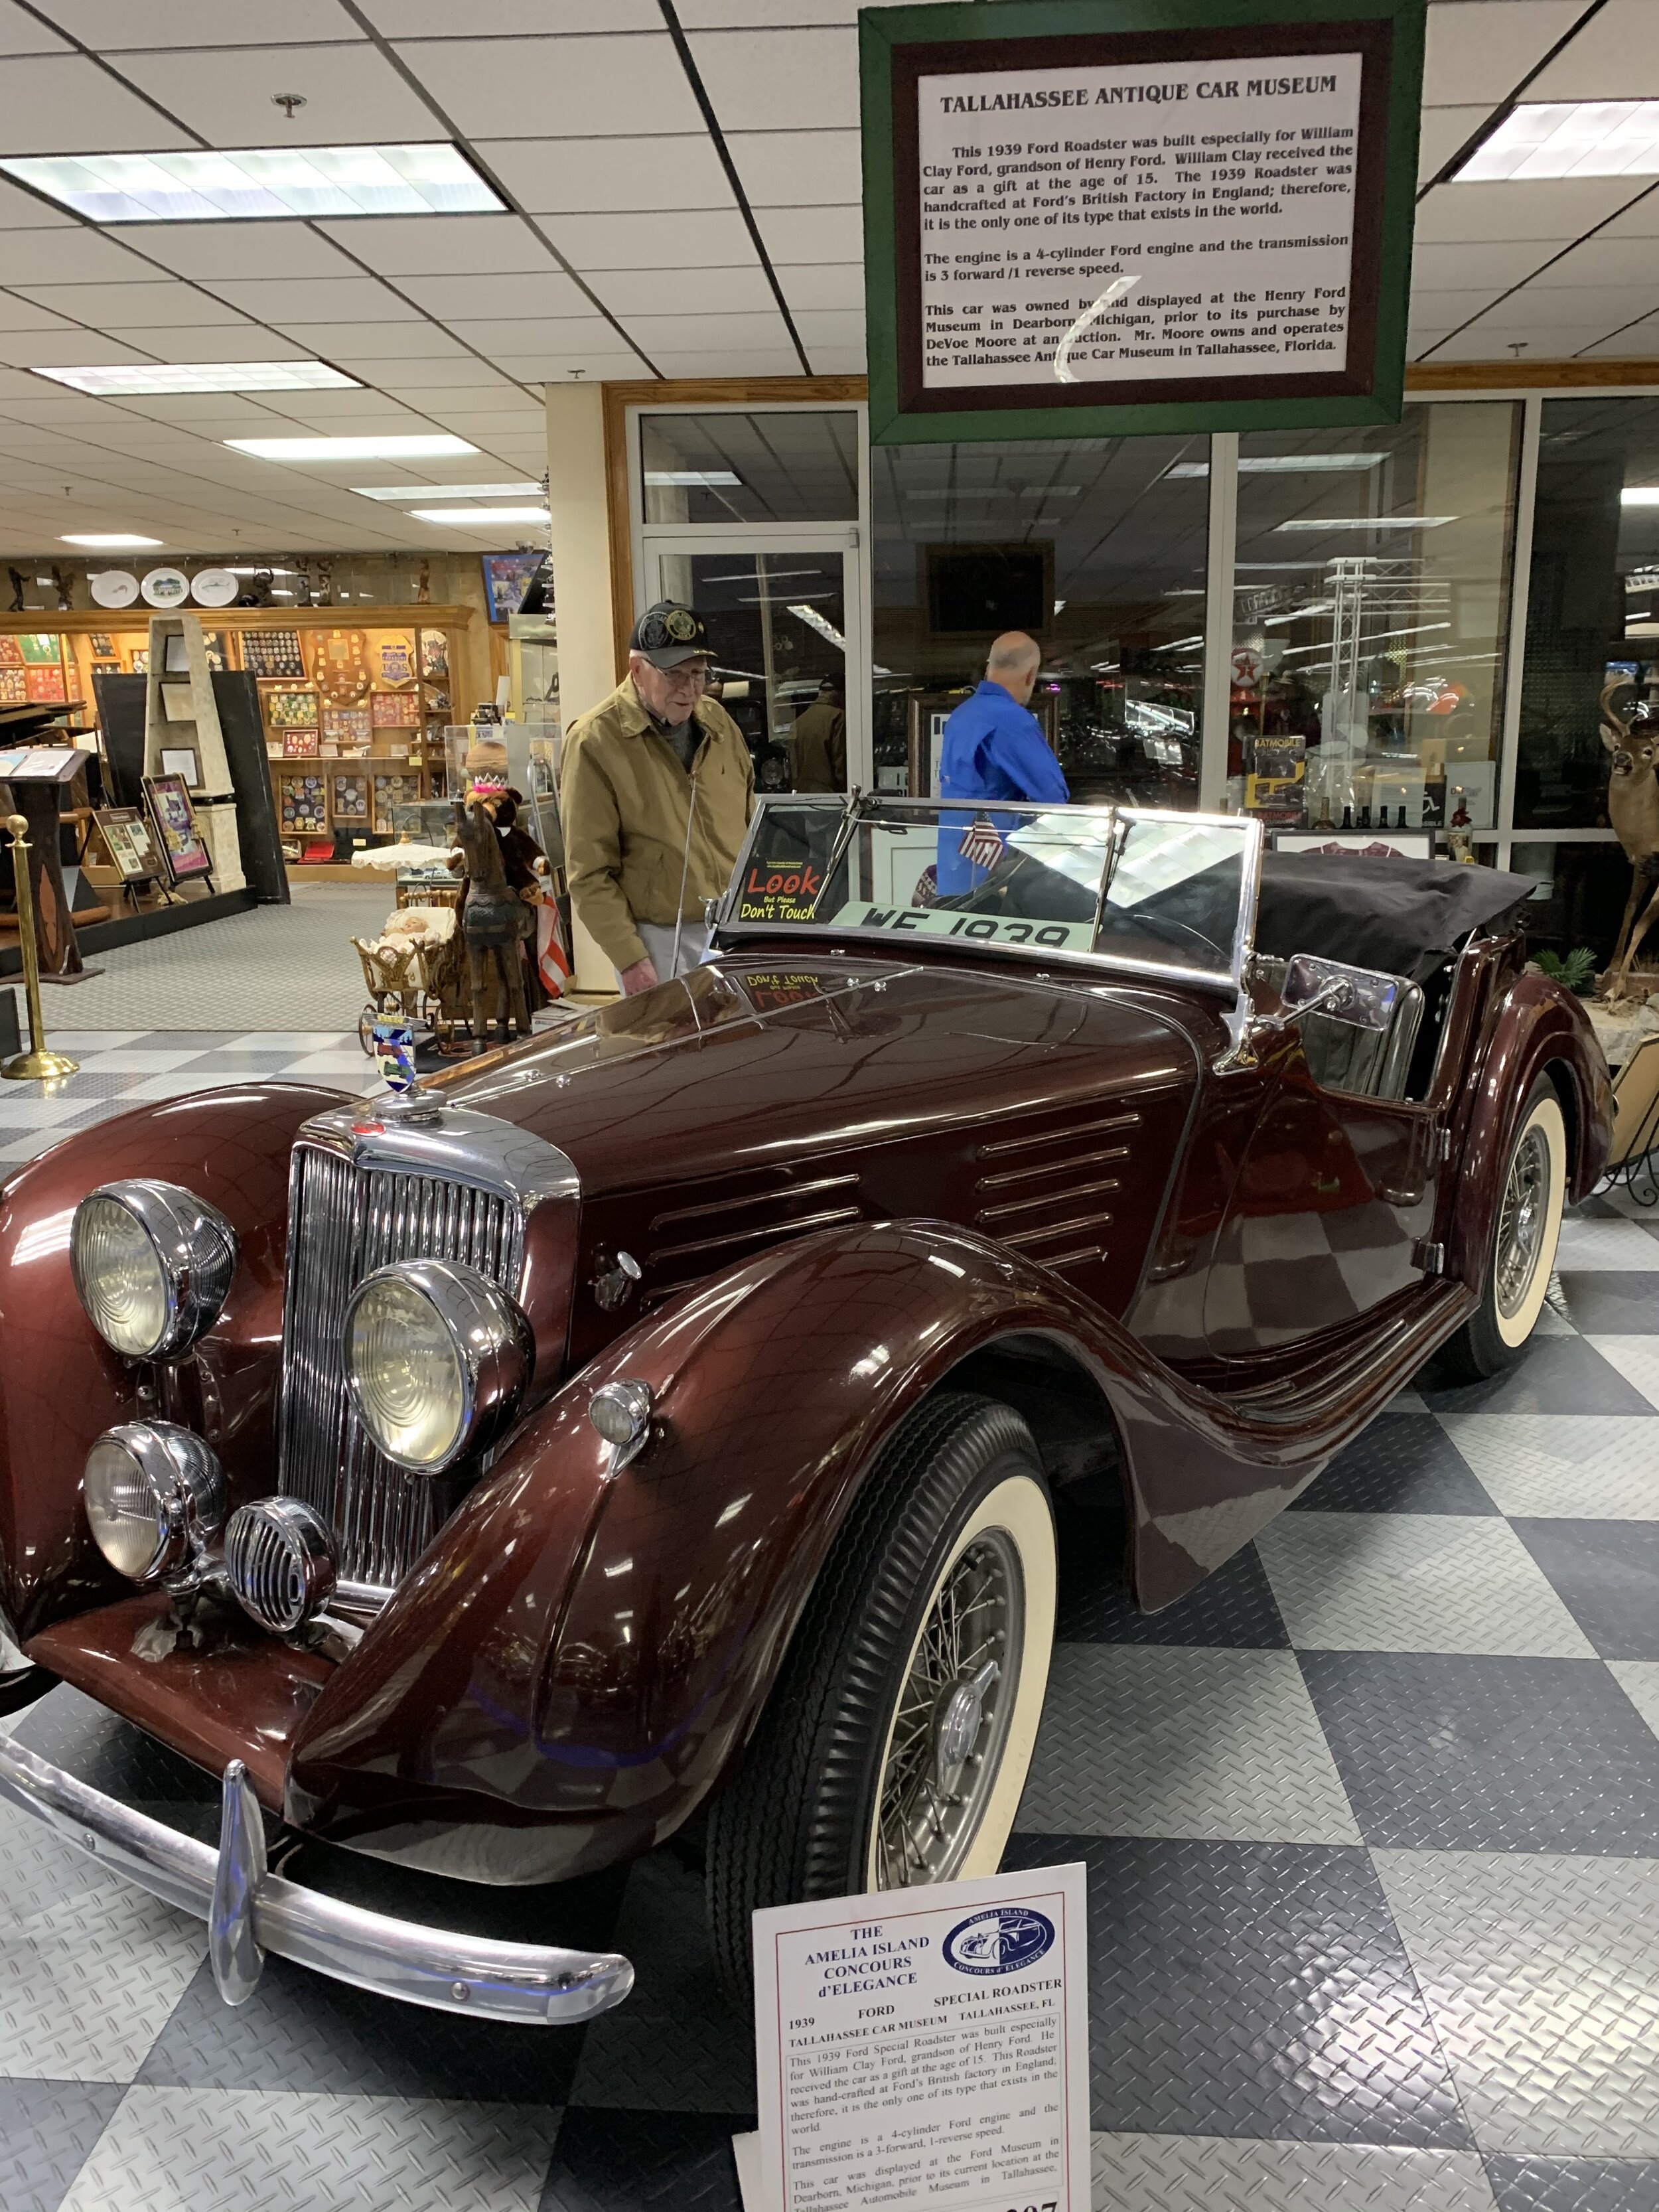  Henry Ford had this car custom-built for his youngest grandson, William Clay Ford’s 15th birthday. It is the only one like it in the world. It was on display at the Ford Museum in Detroit until Mr. Moore purchased it and brought it to Tallahassee a 